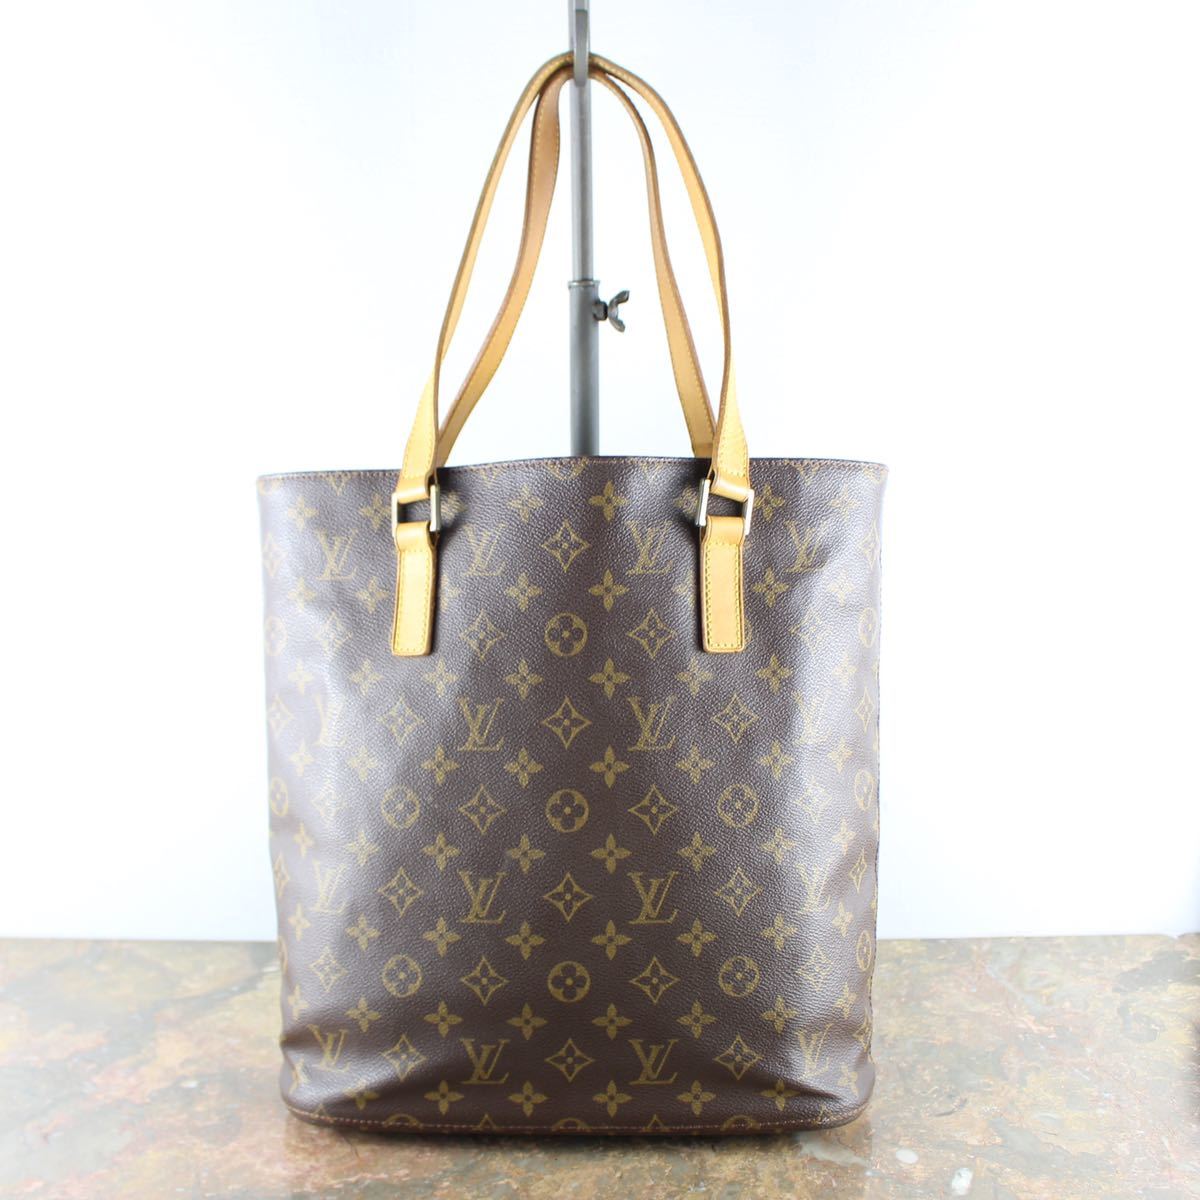 LOUIS VUITTON M51170 SR0042 MONOGRAM PATTERNED TOTE BAG MADE IN  FRANCE/ルイヴィトンヴァヴァンGMモノグラム柄トートバッグ